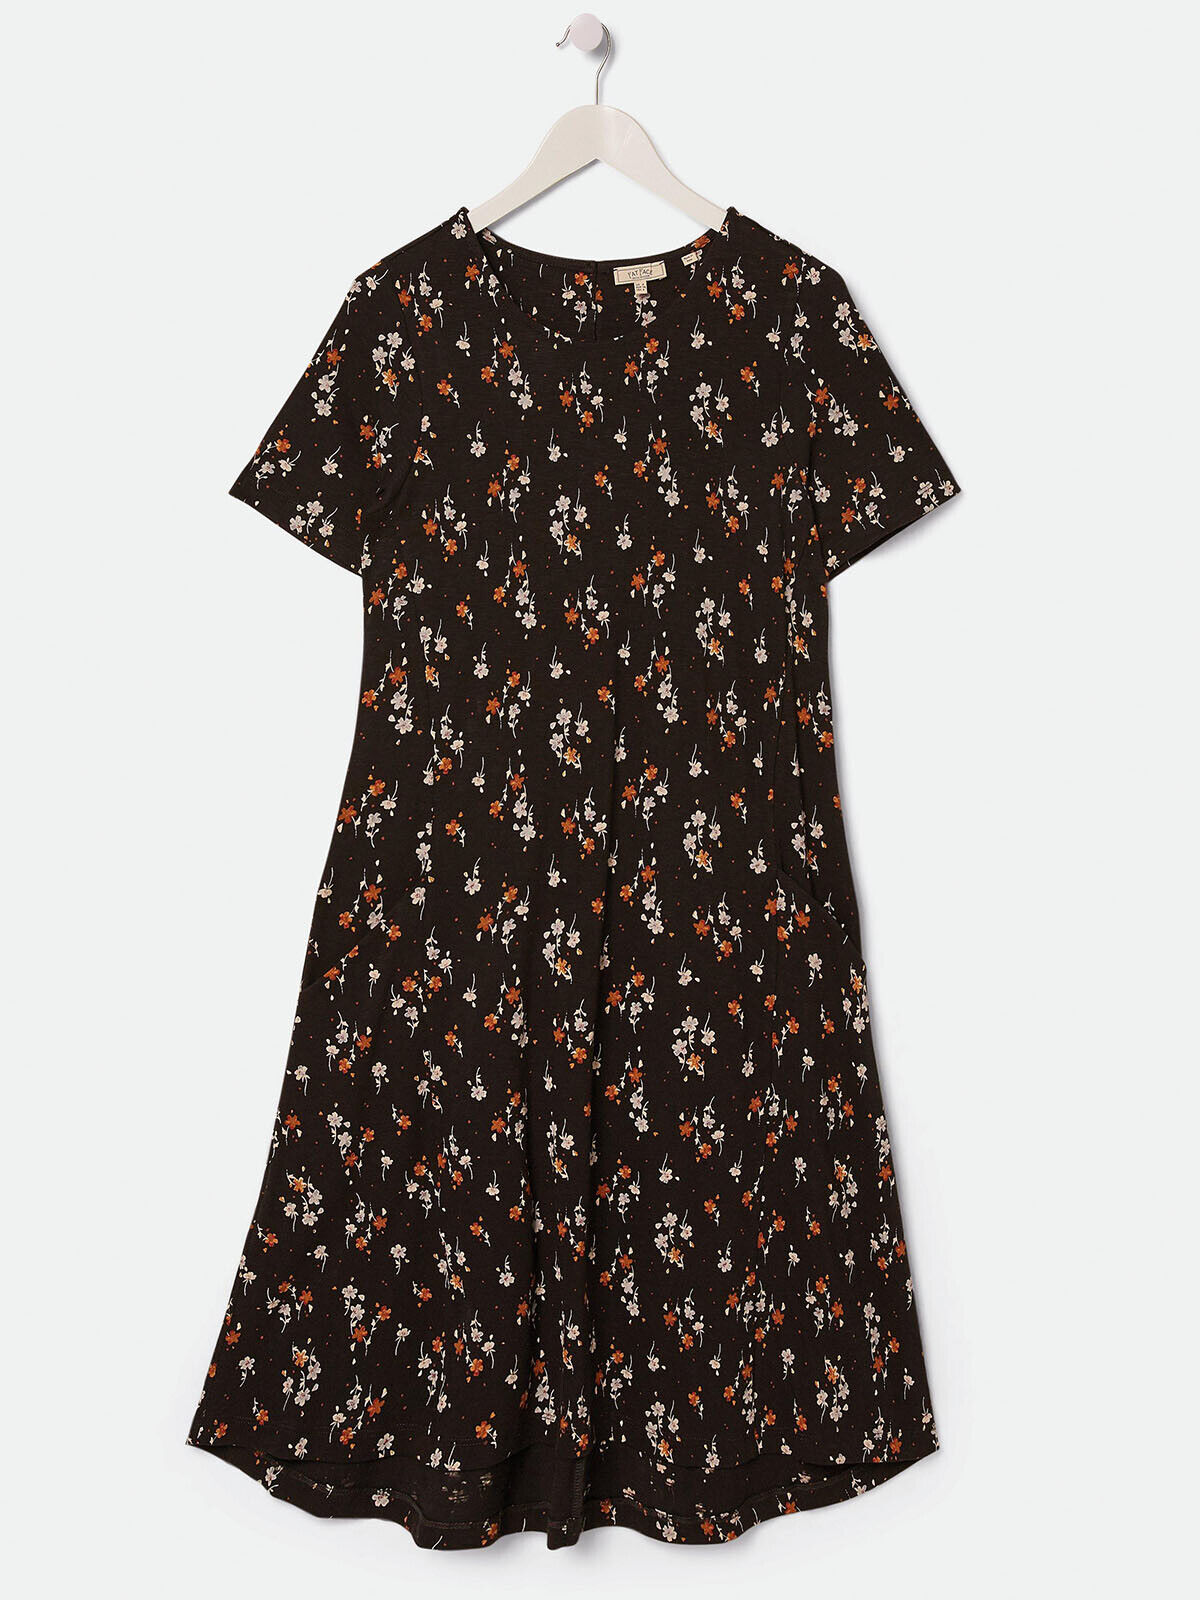 EX Fat Face Black Simone Star Floral Dress in Size 10